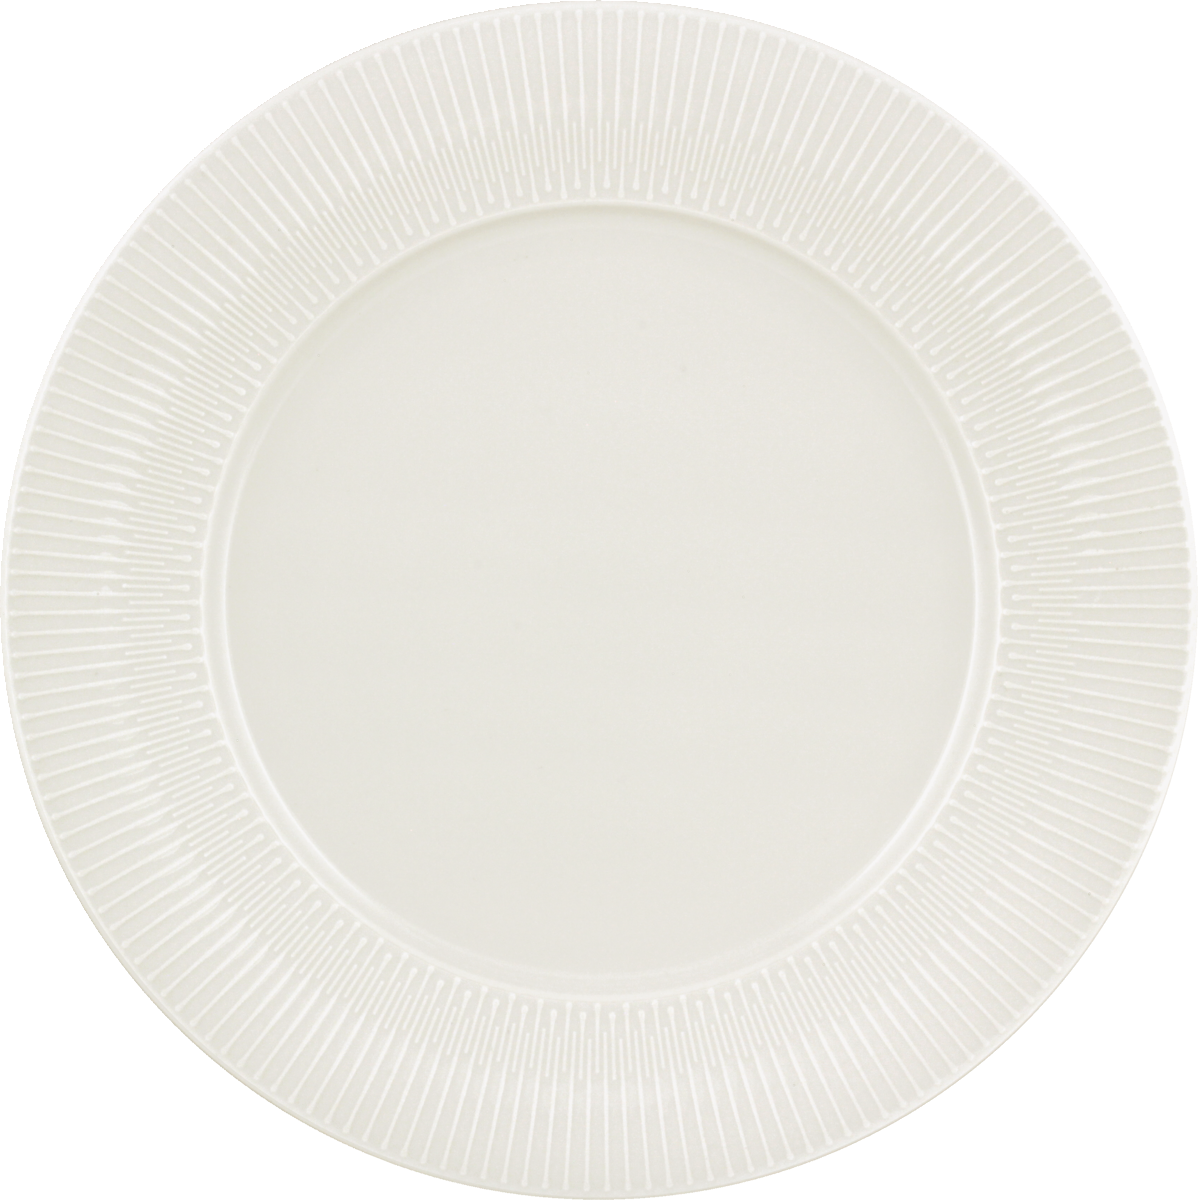 Plate flat round with rim embossed 26cm